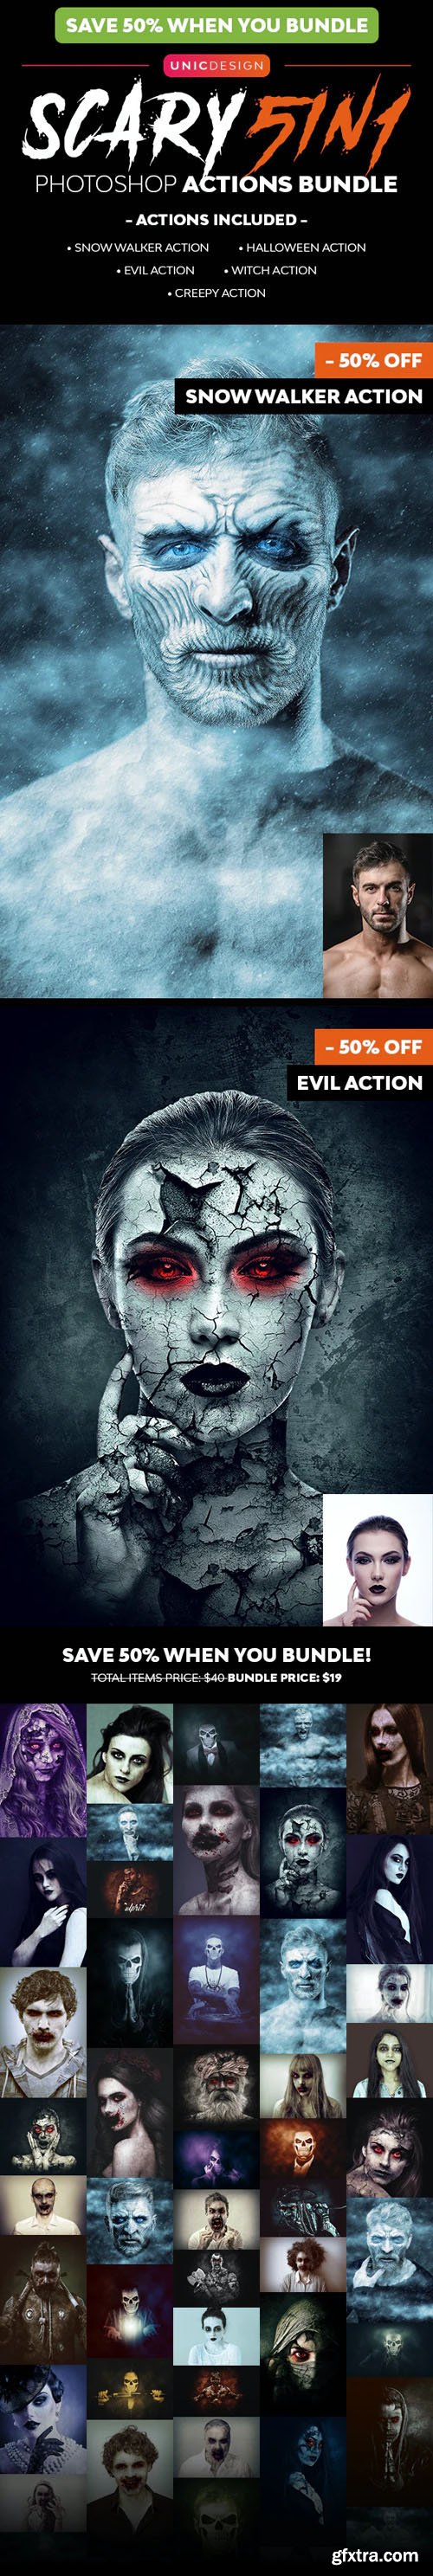 Scary Photoshop Actions - 5in1 Bundle